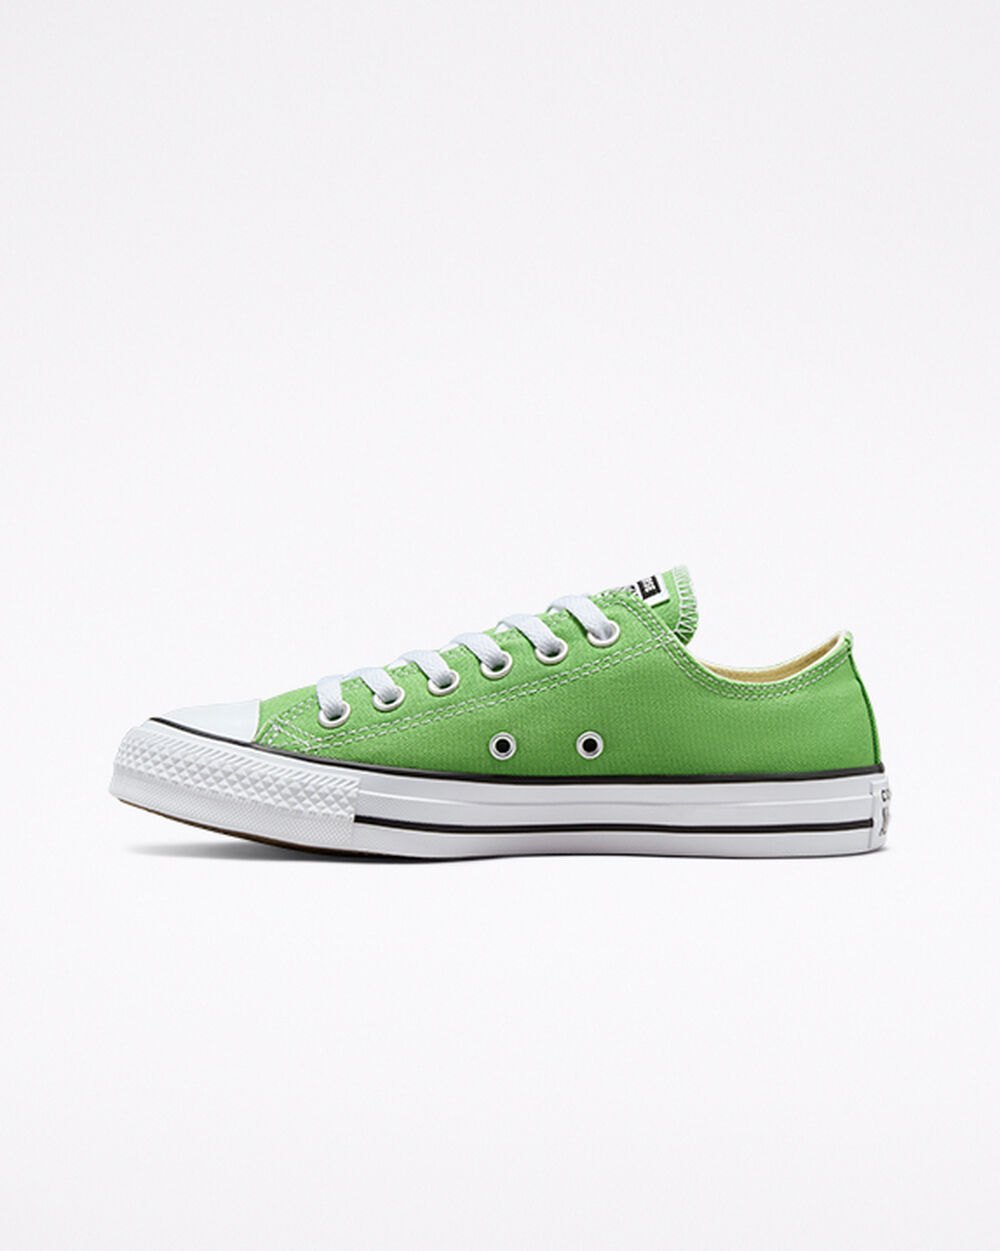 Tenis Converse Chuck Taylor All Star Mujer Verdes | Mexico-803756